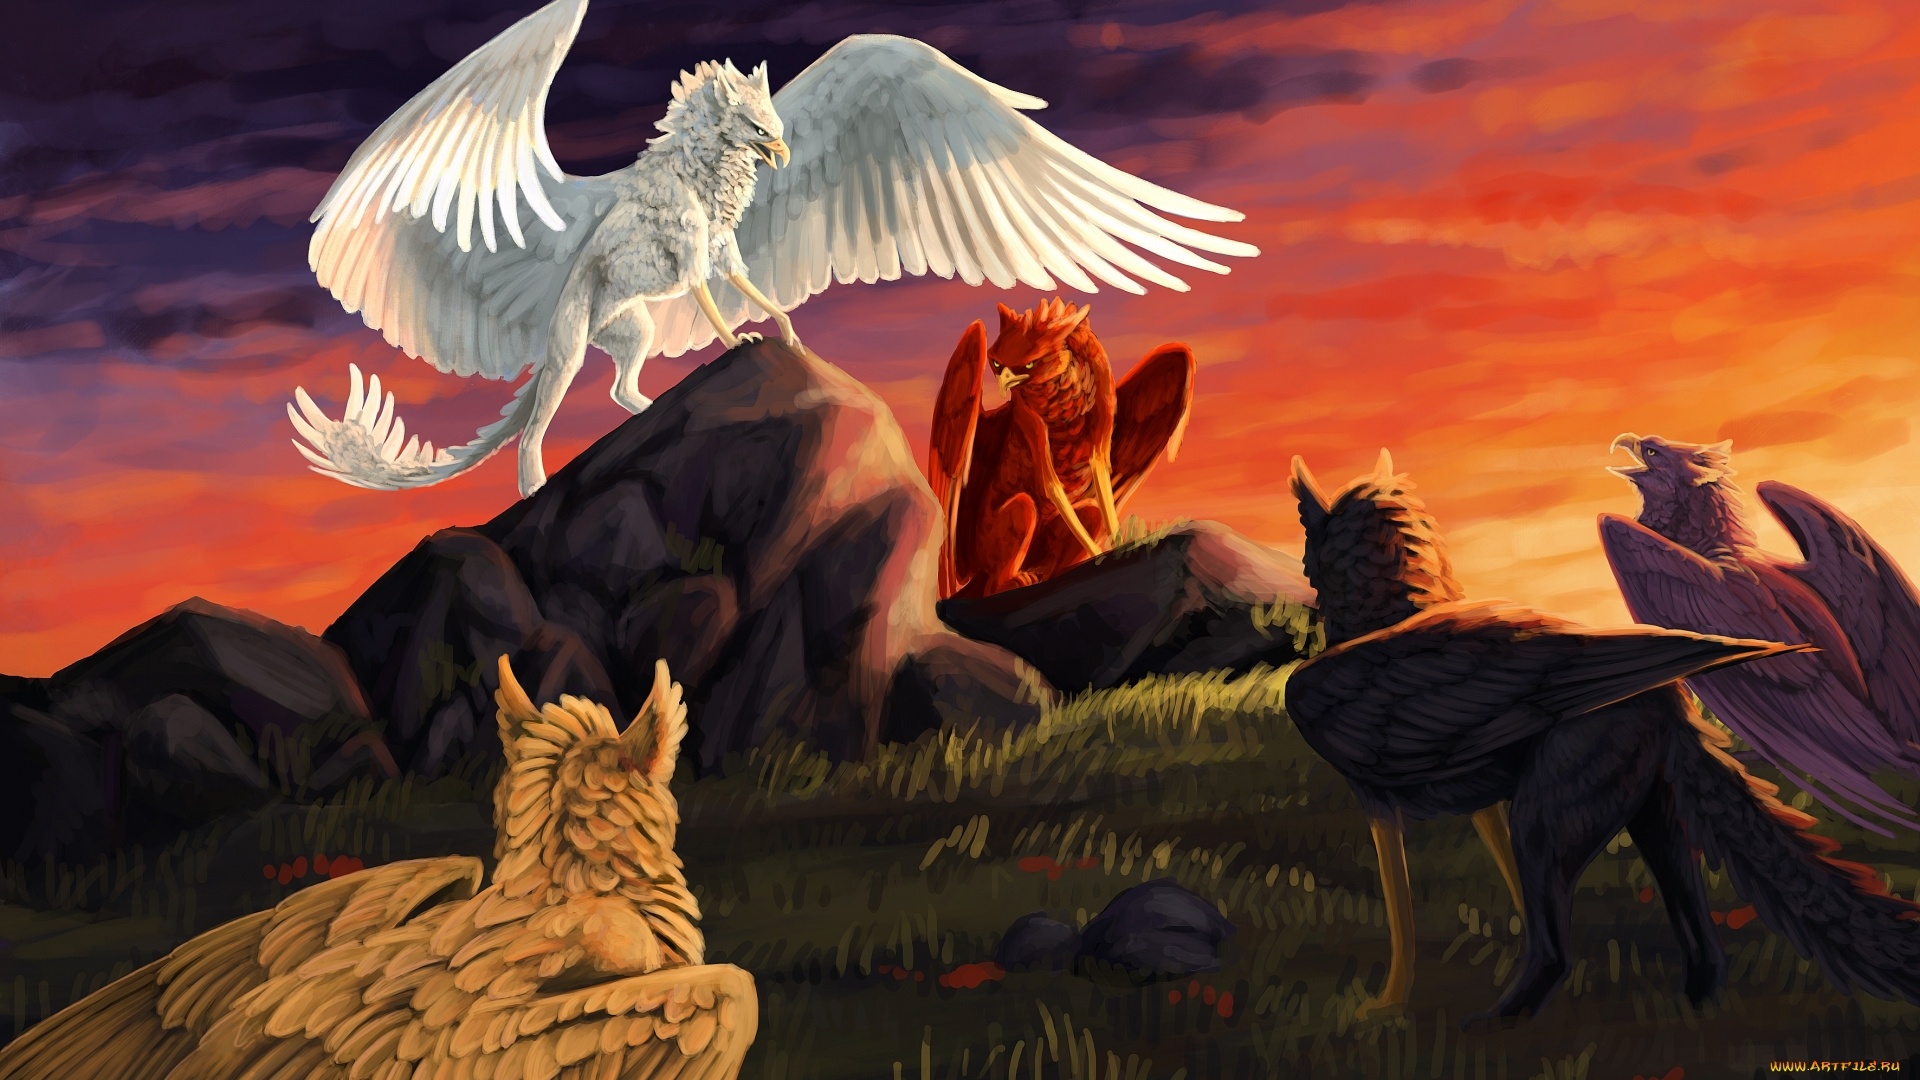 Mythical Creatures wallpaper for pc